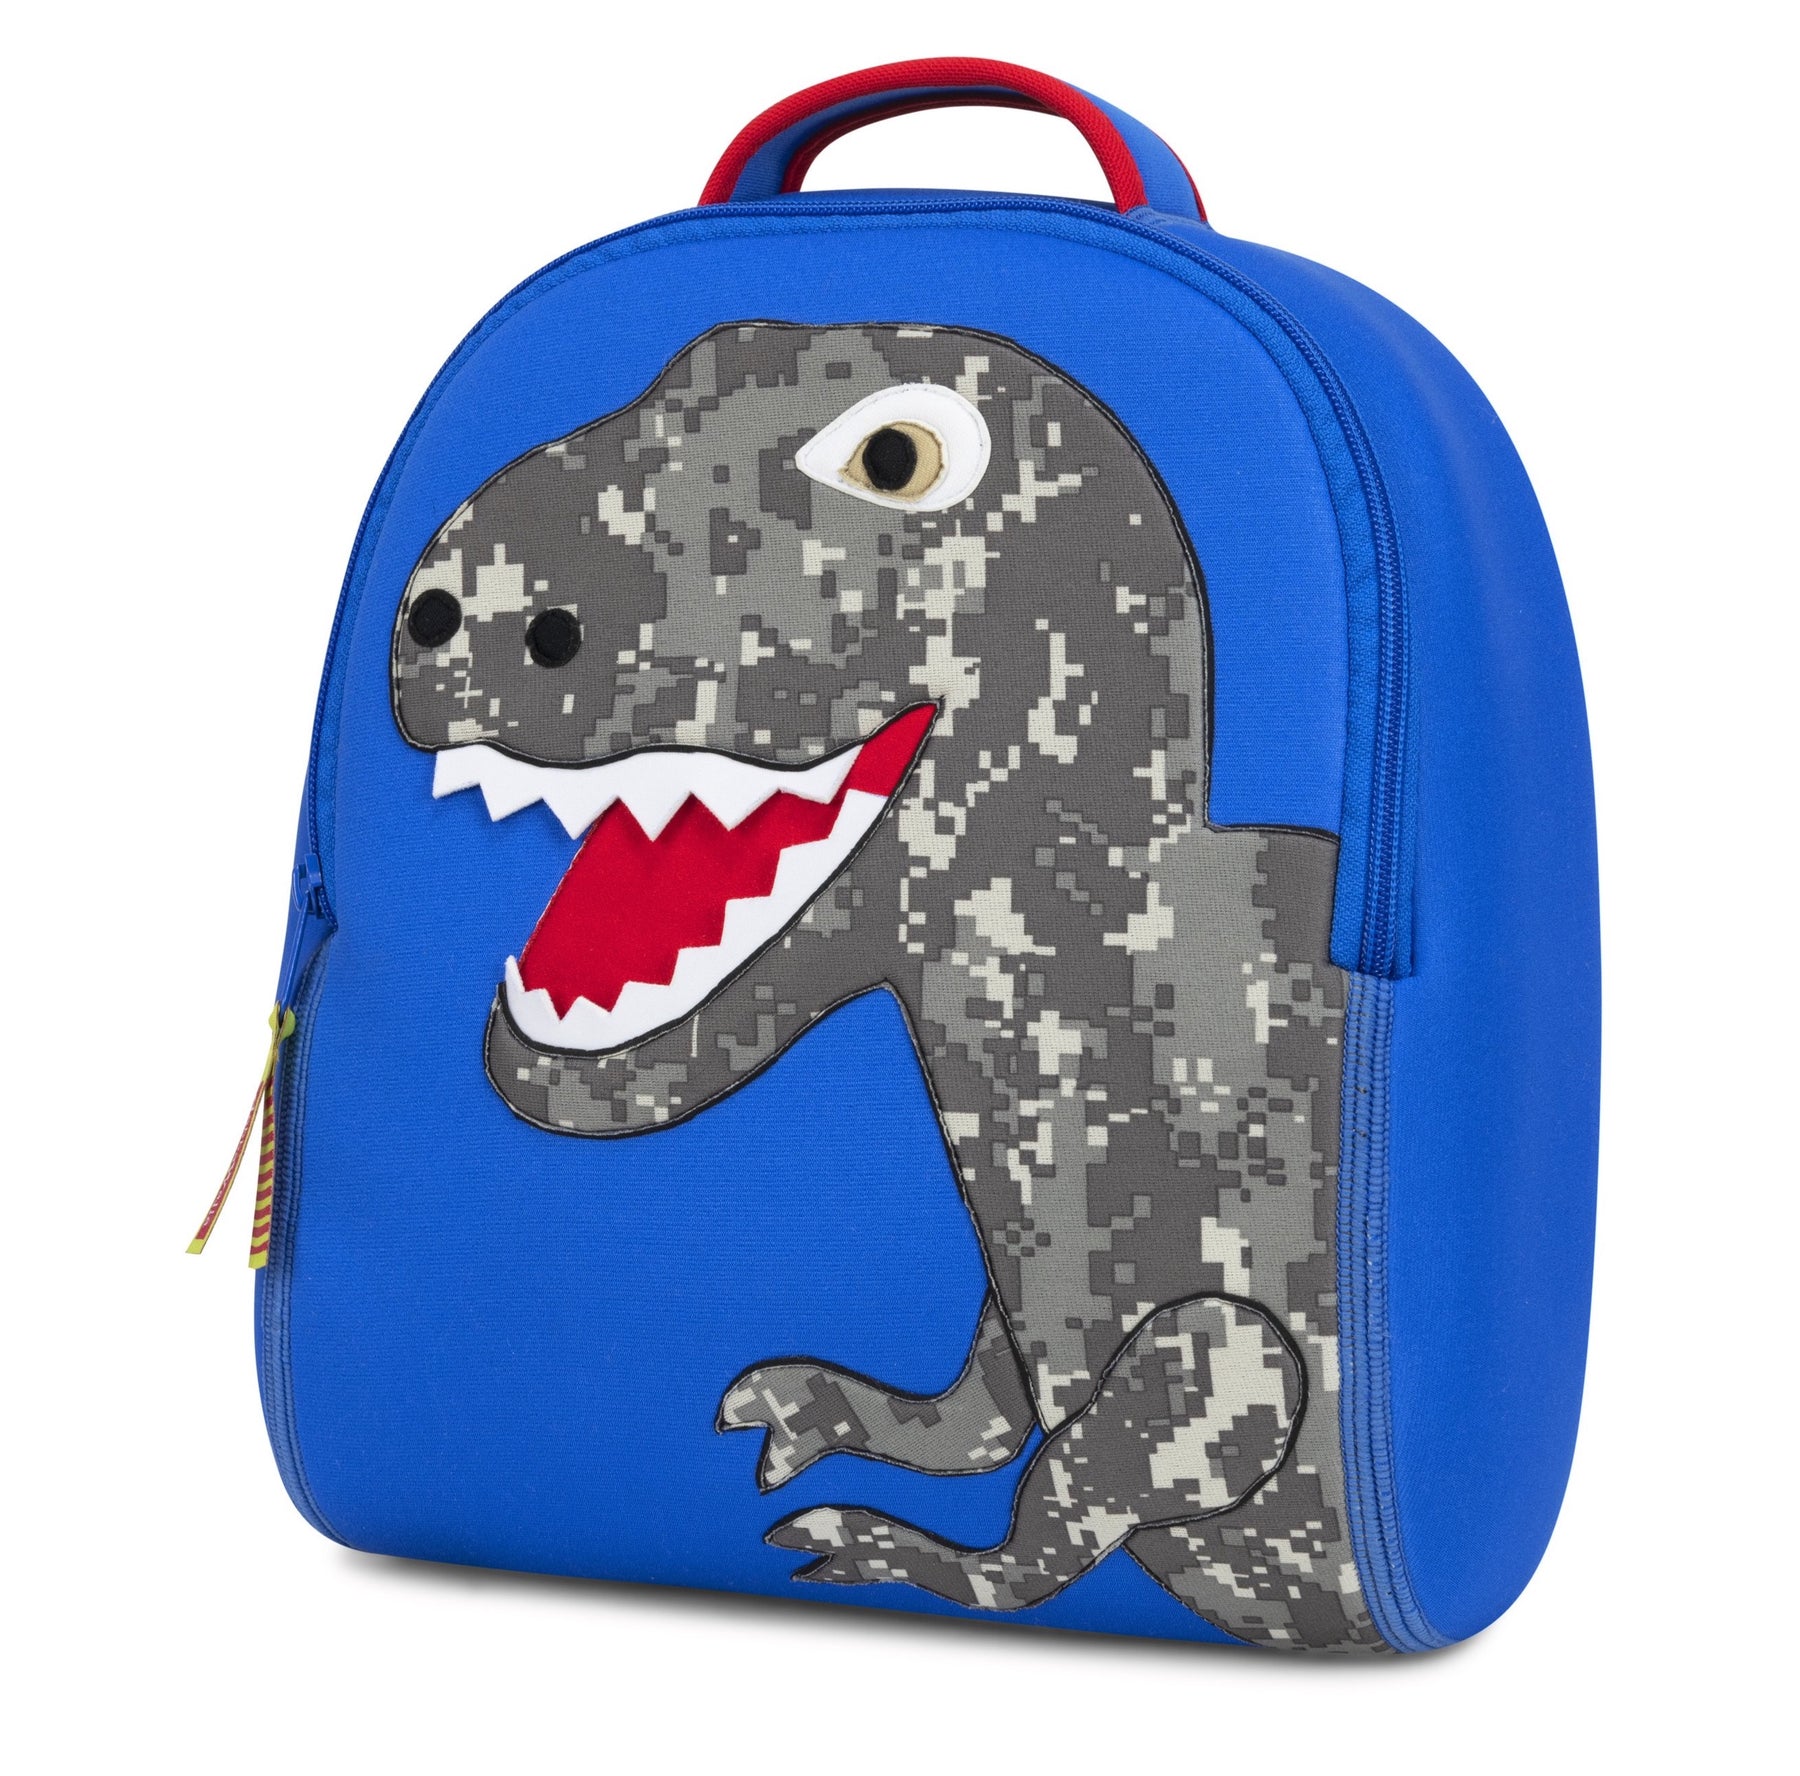 Personalized Dinosaur Embroidered Backpack by Stephen Joseph